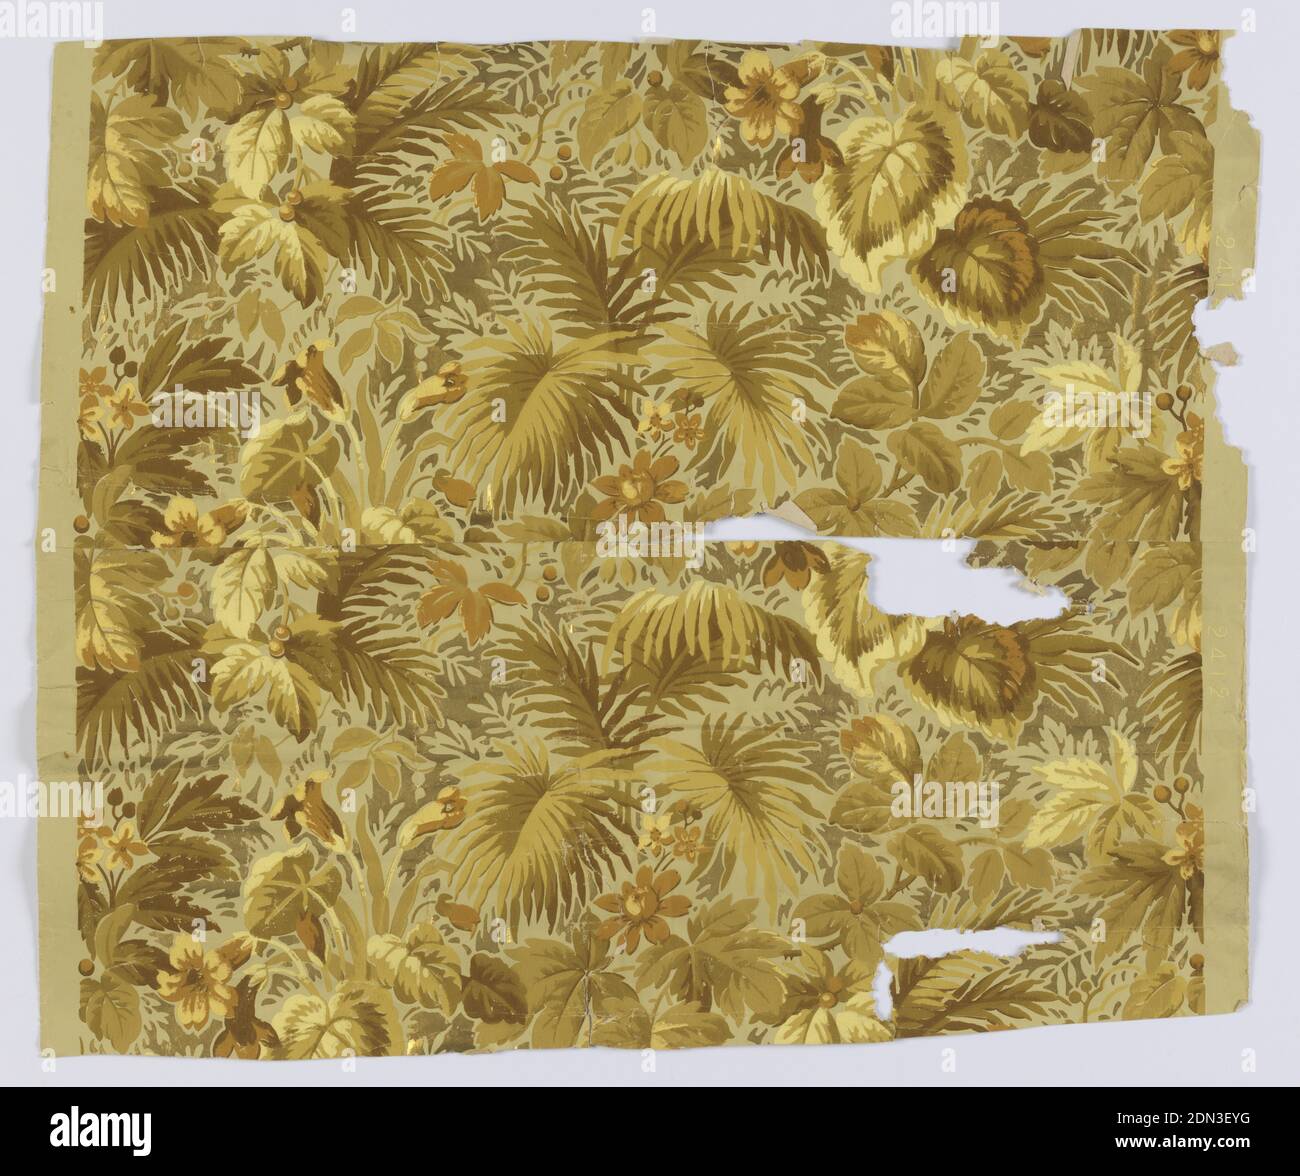 Sidewall, Machine-printed paper, On metallic gold ground, yellow and tan ferns alternate with lush orange flowers and tan foliage., 1870–90, Wallcoverings, Sidewall Stock Photo